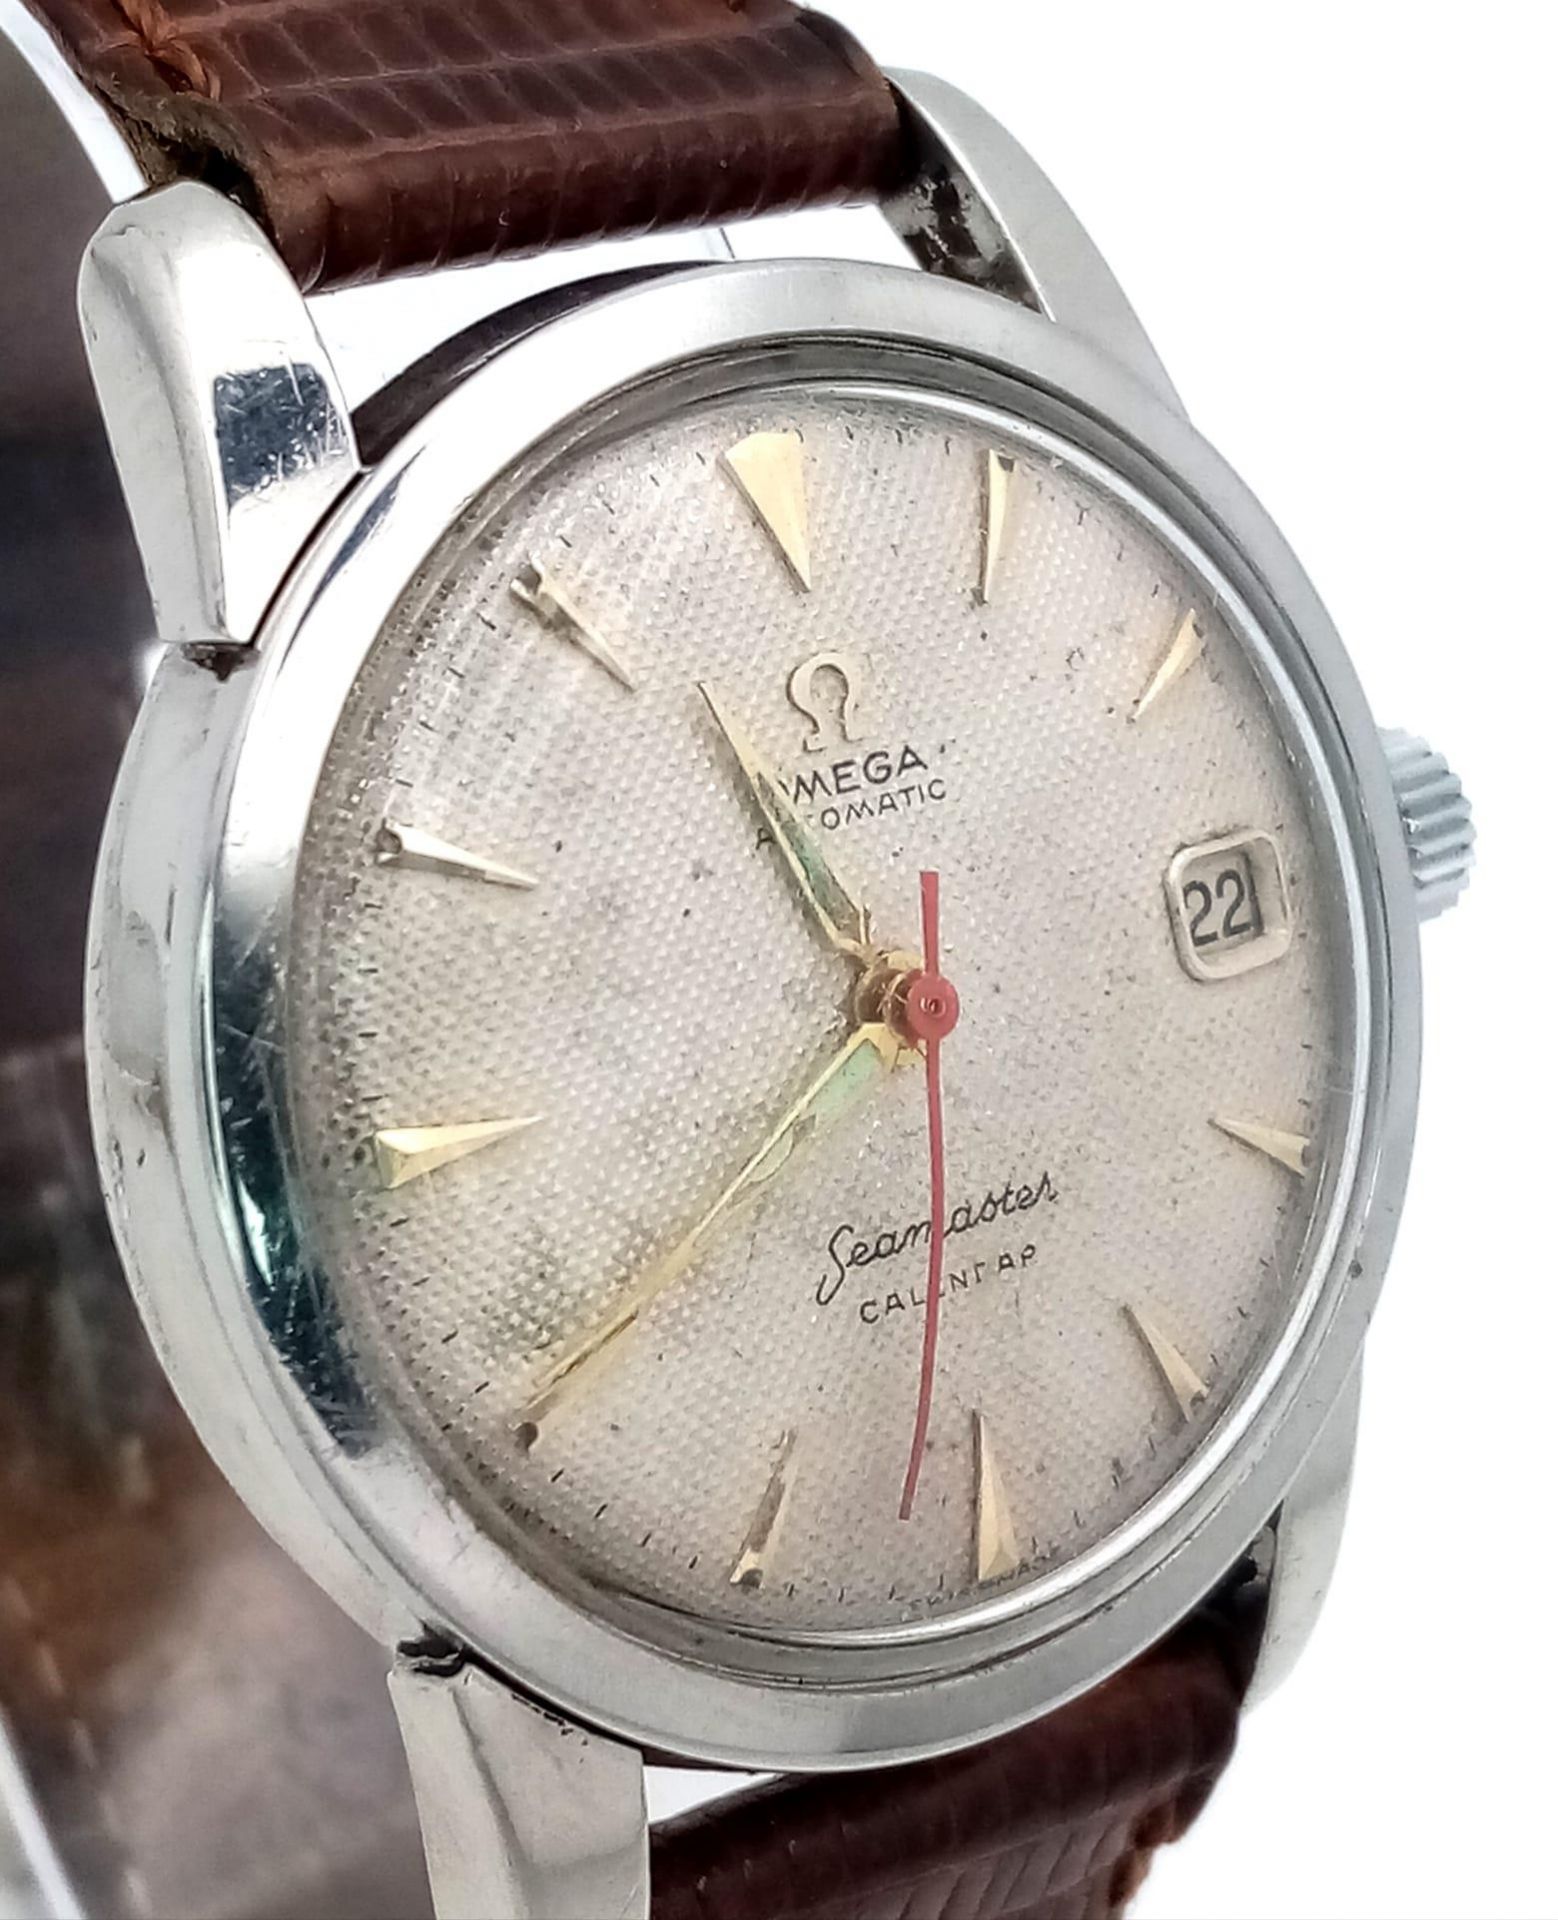 A Vintage Omega Seamaster Calendar Gents Watch. Brown leather strap. Stainless steel case - 33mm. - Image 4 of 8